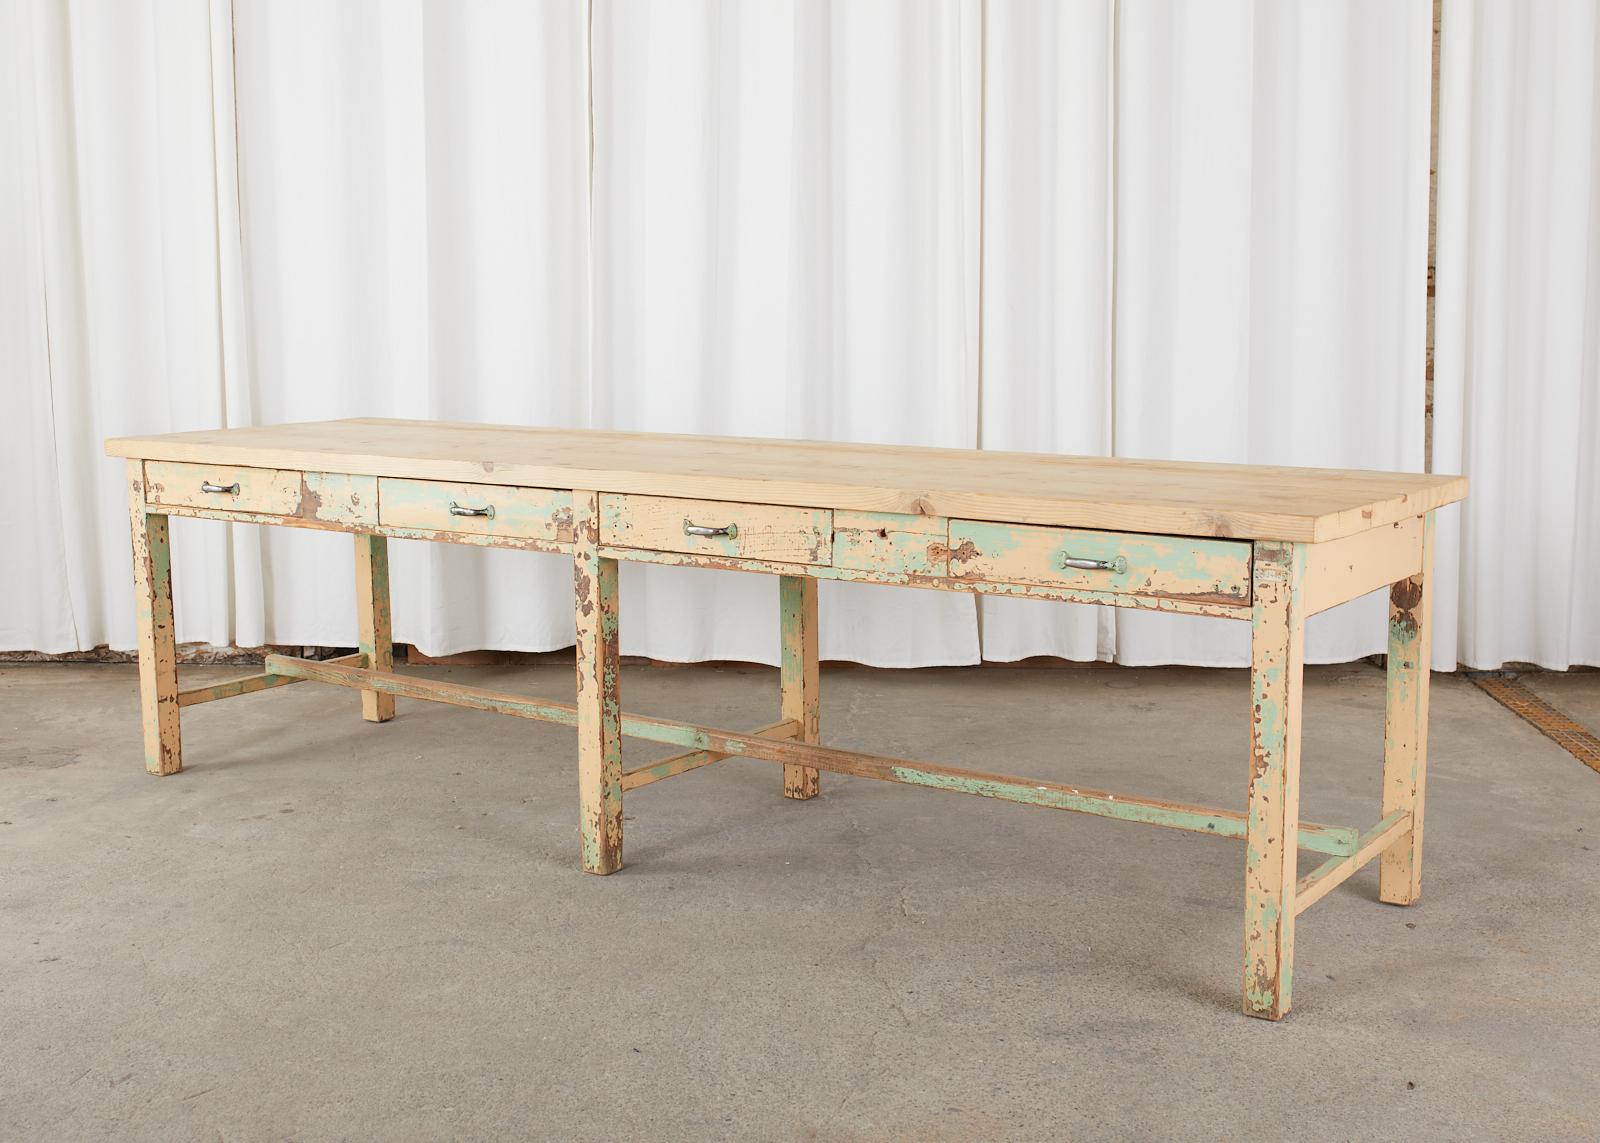 Monumental French industrial work table or farm potting table with four large storage drawers. The long table is crafted from pine and features a later added pine plank top nearly 2 inches thick. The trestle style base has six large square legs